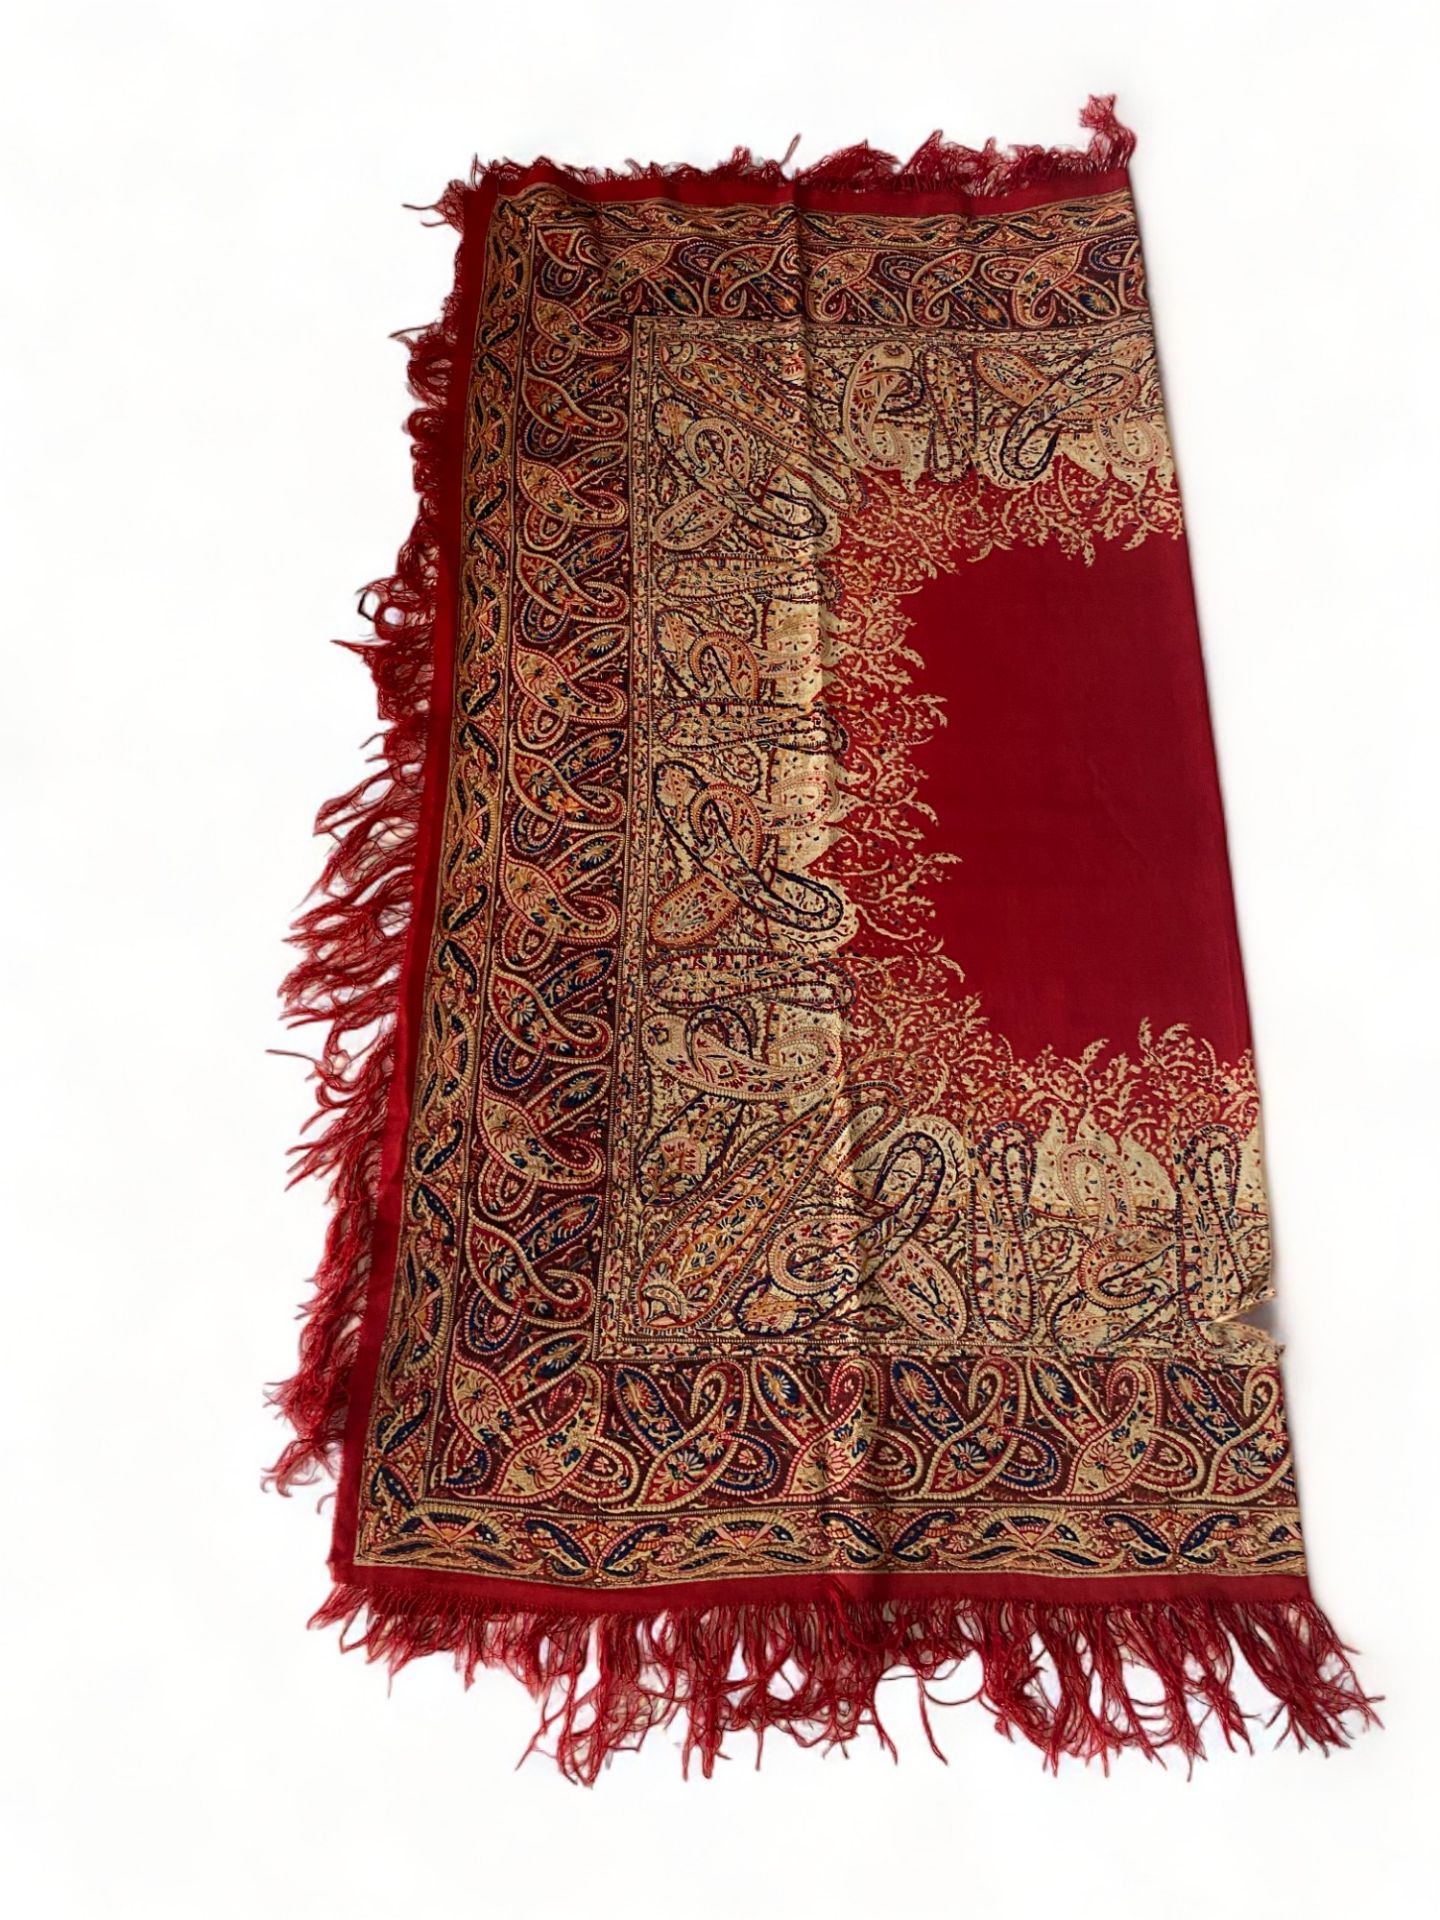 A 19th century red, brown and blue paisley cotton shawl together with another shawl - Image 5 of 13